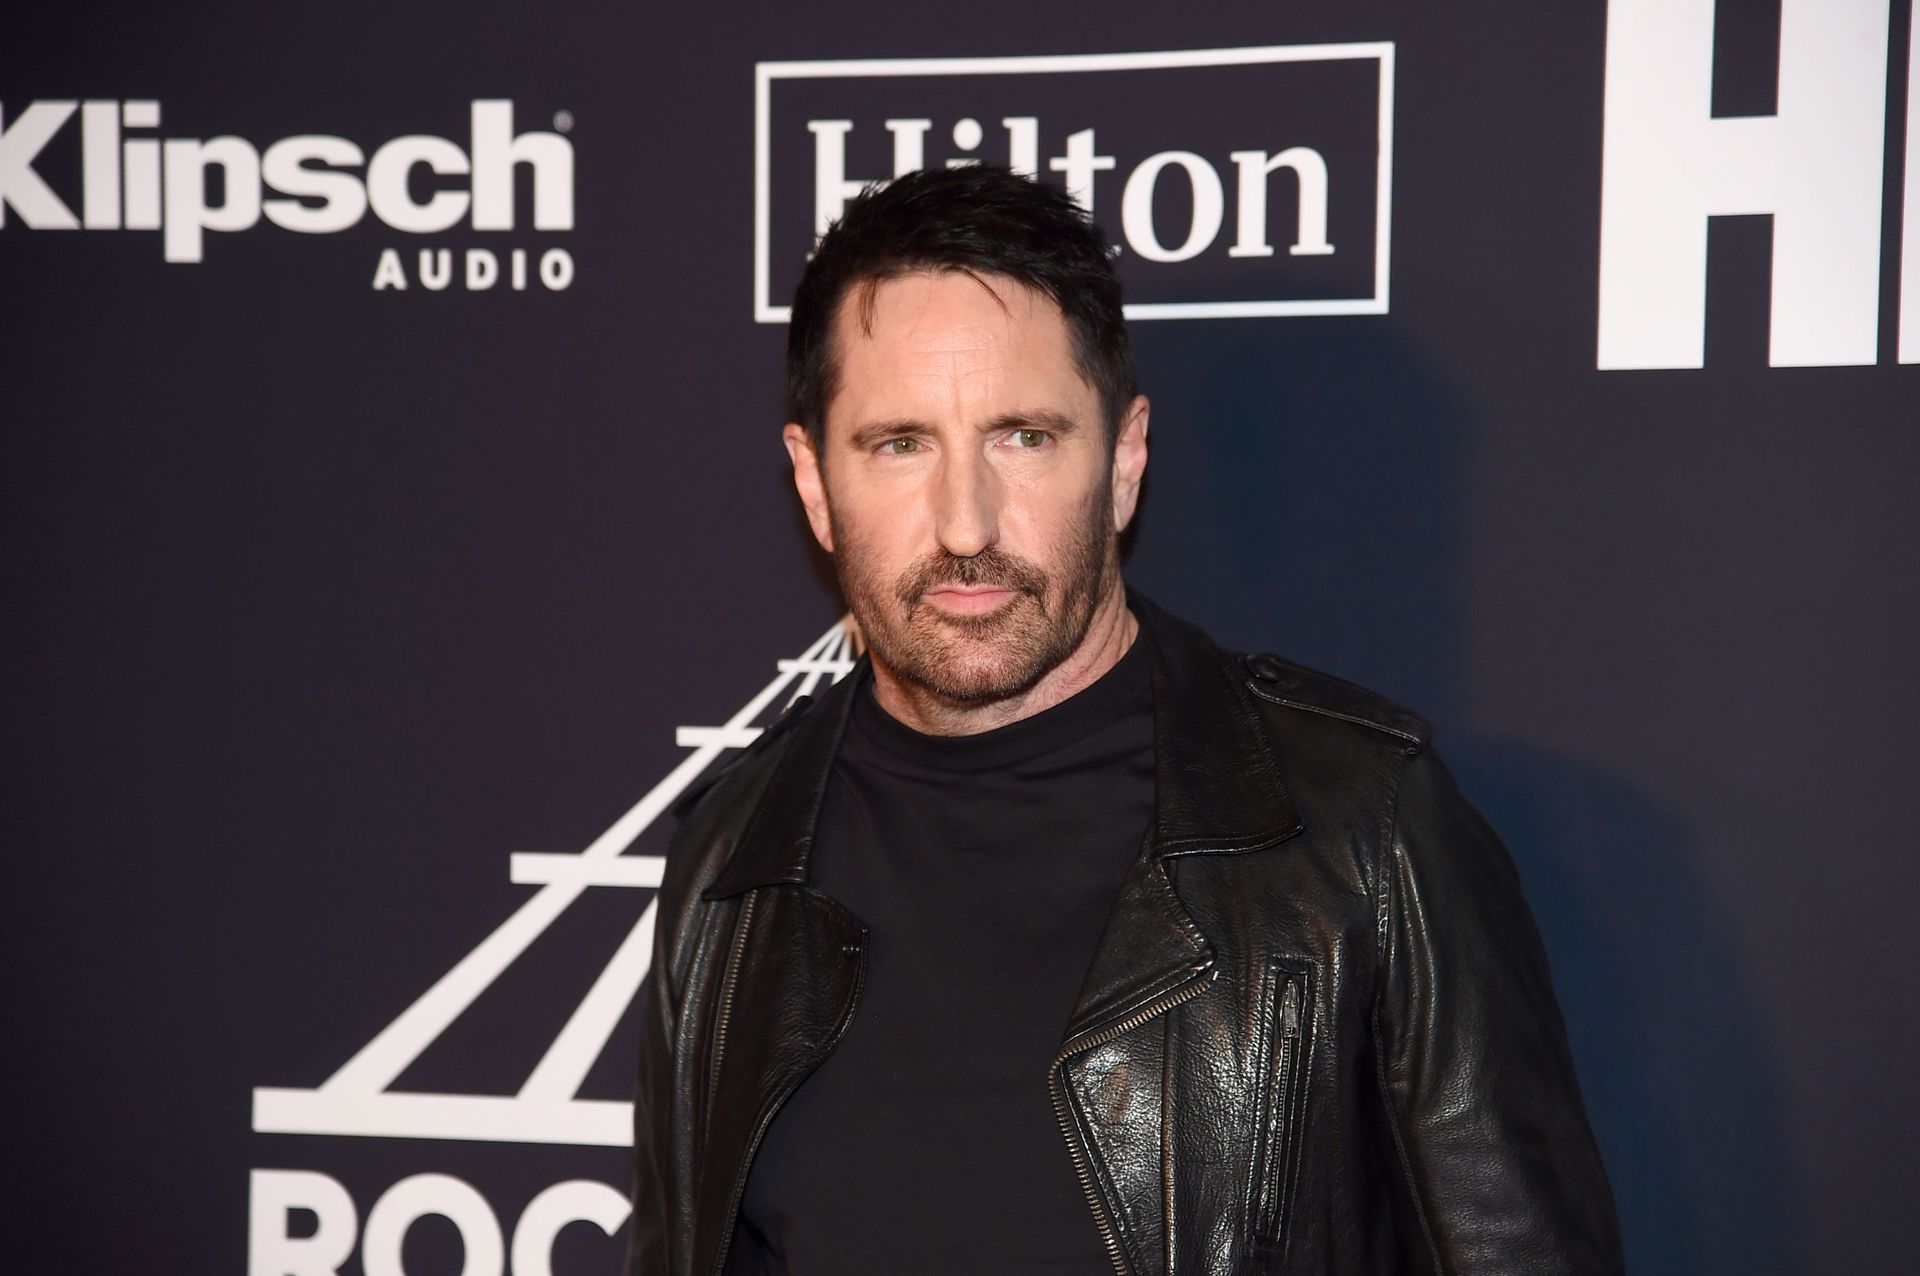 NEW YORK, NEW YORK – MARCH 29 : Nine Inch Nails’Trent Reznor attends the 2019 Rock & Roll Hall Of Fame Induction Ceremony at Barclays Center on March 29, 2019 in New York City. (Photo by Jamie McCarthy/WireImage)